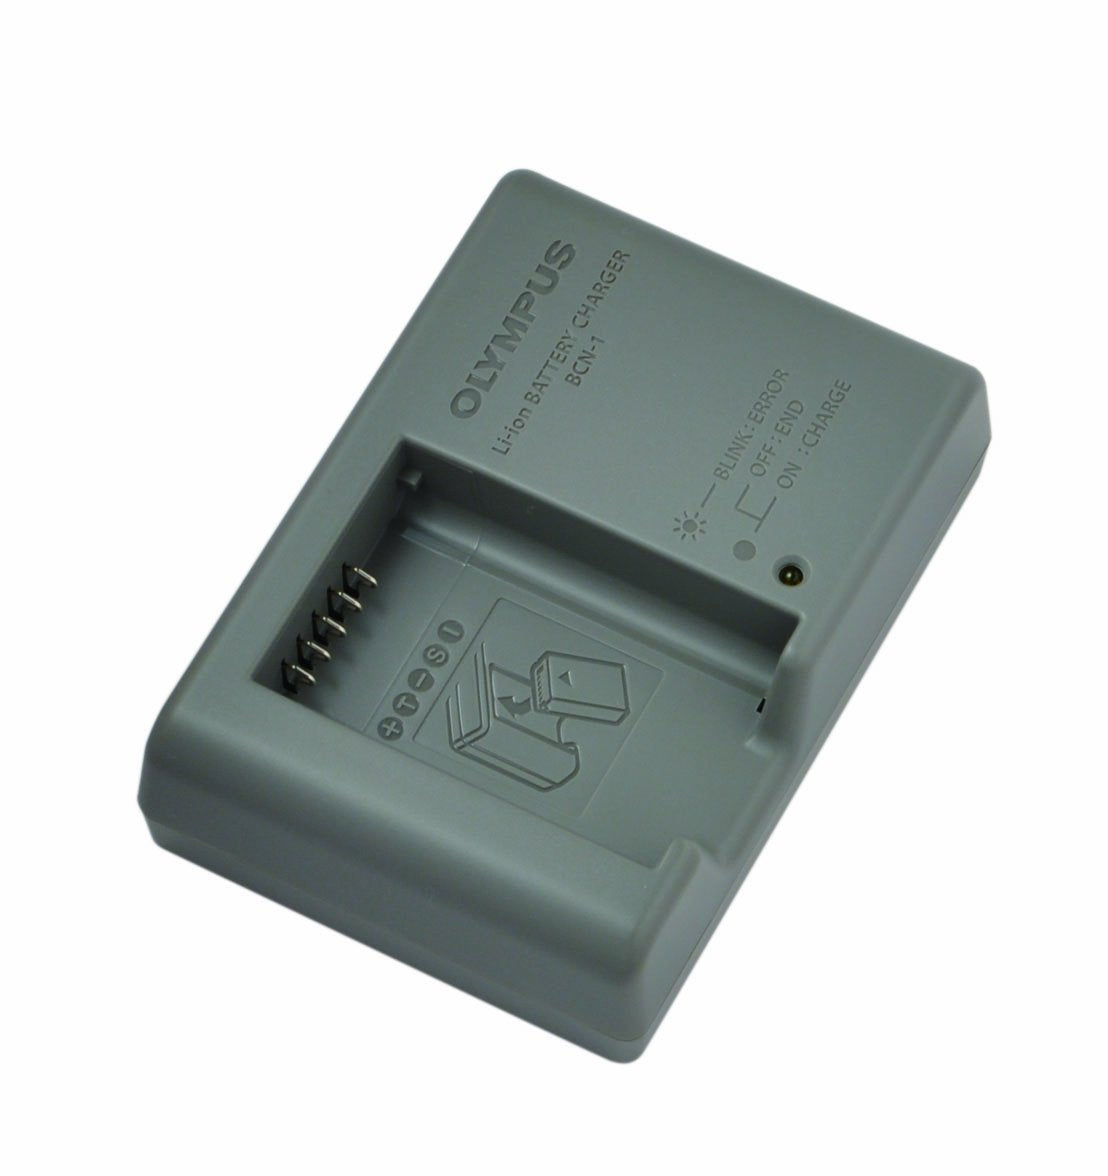 Olympus Battery Charger for BLN-1(EG) Battery